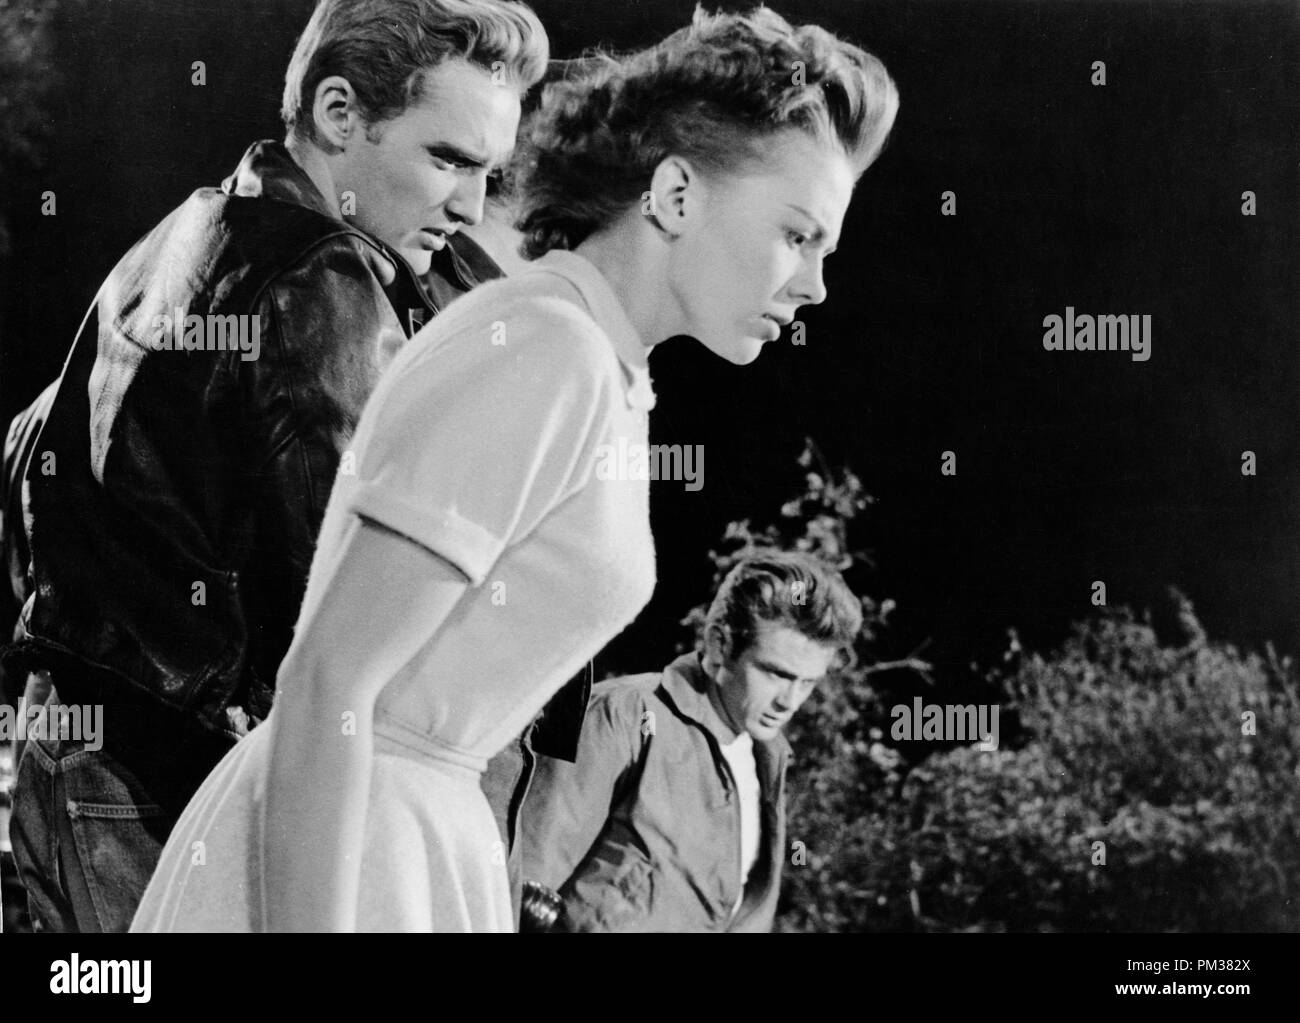 James Dean, Dennis Hopper and Natalie Wood 'Rebel Without a Cause' 1955 Warner   File Reference # 1140 006THA Stock Photo